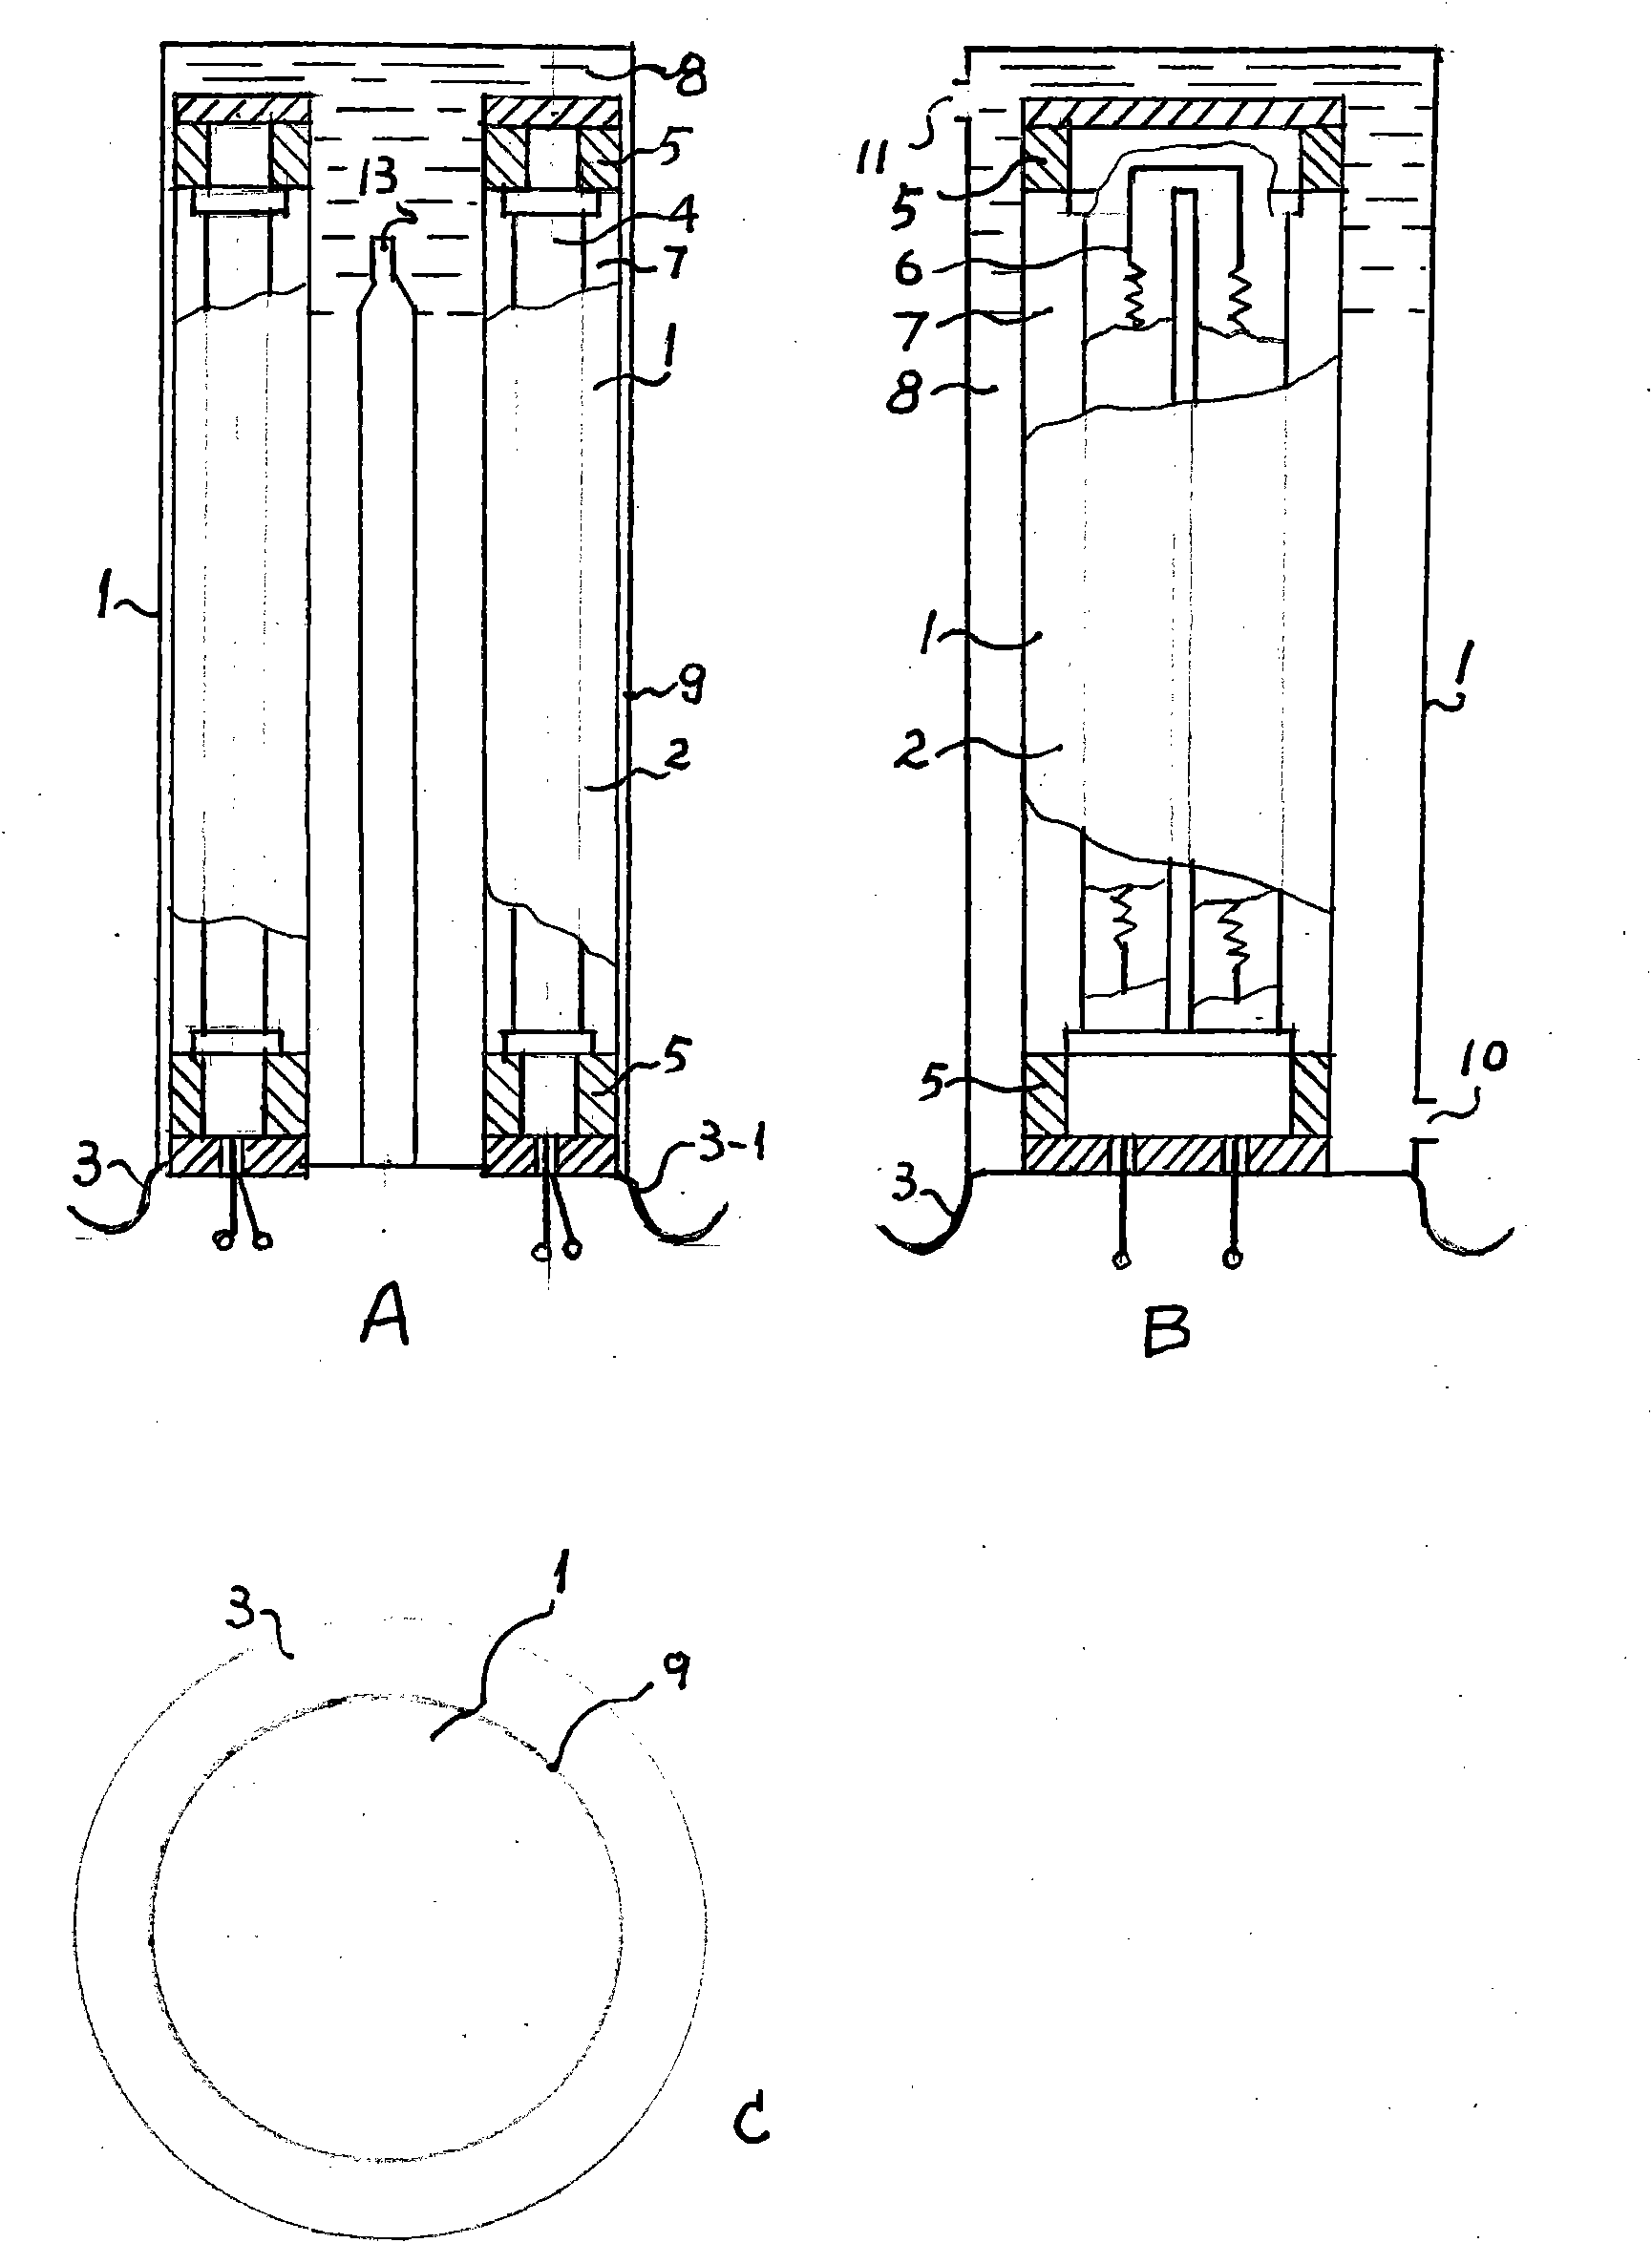 Water heating device